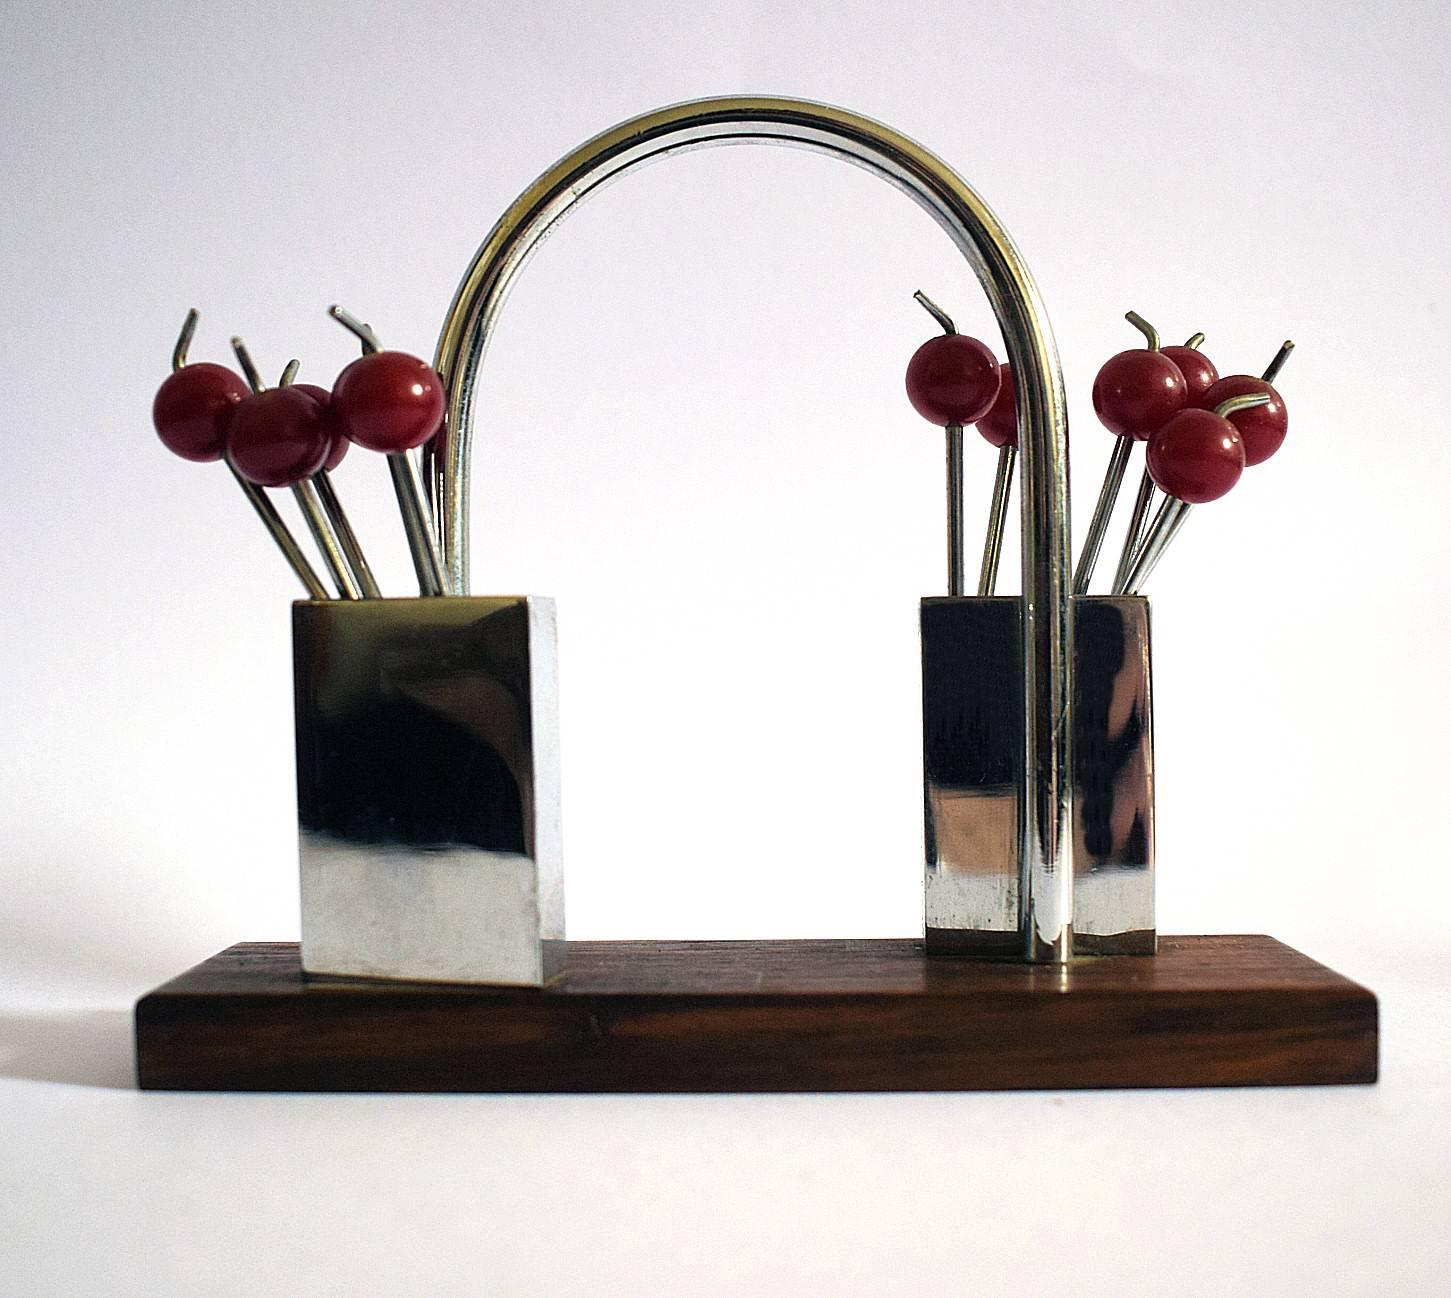 A charming 1930s, cocktail set originating from France. Features cherry red bakelite cocktail sticks with chromed metal prongs, all contained within two chrome boxed holders on a rosewood base. Great set in very good condition, minimal signs of age.